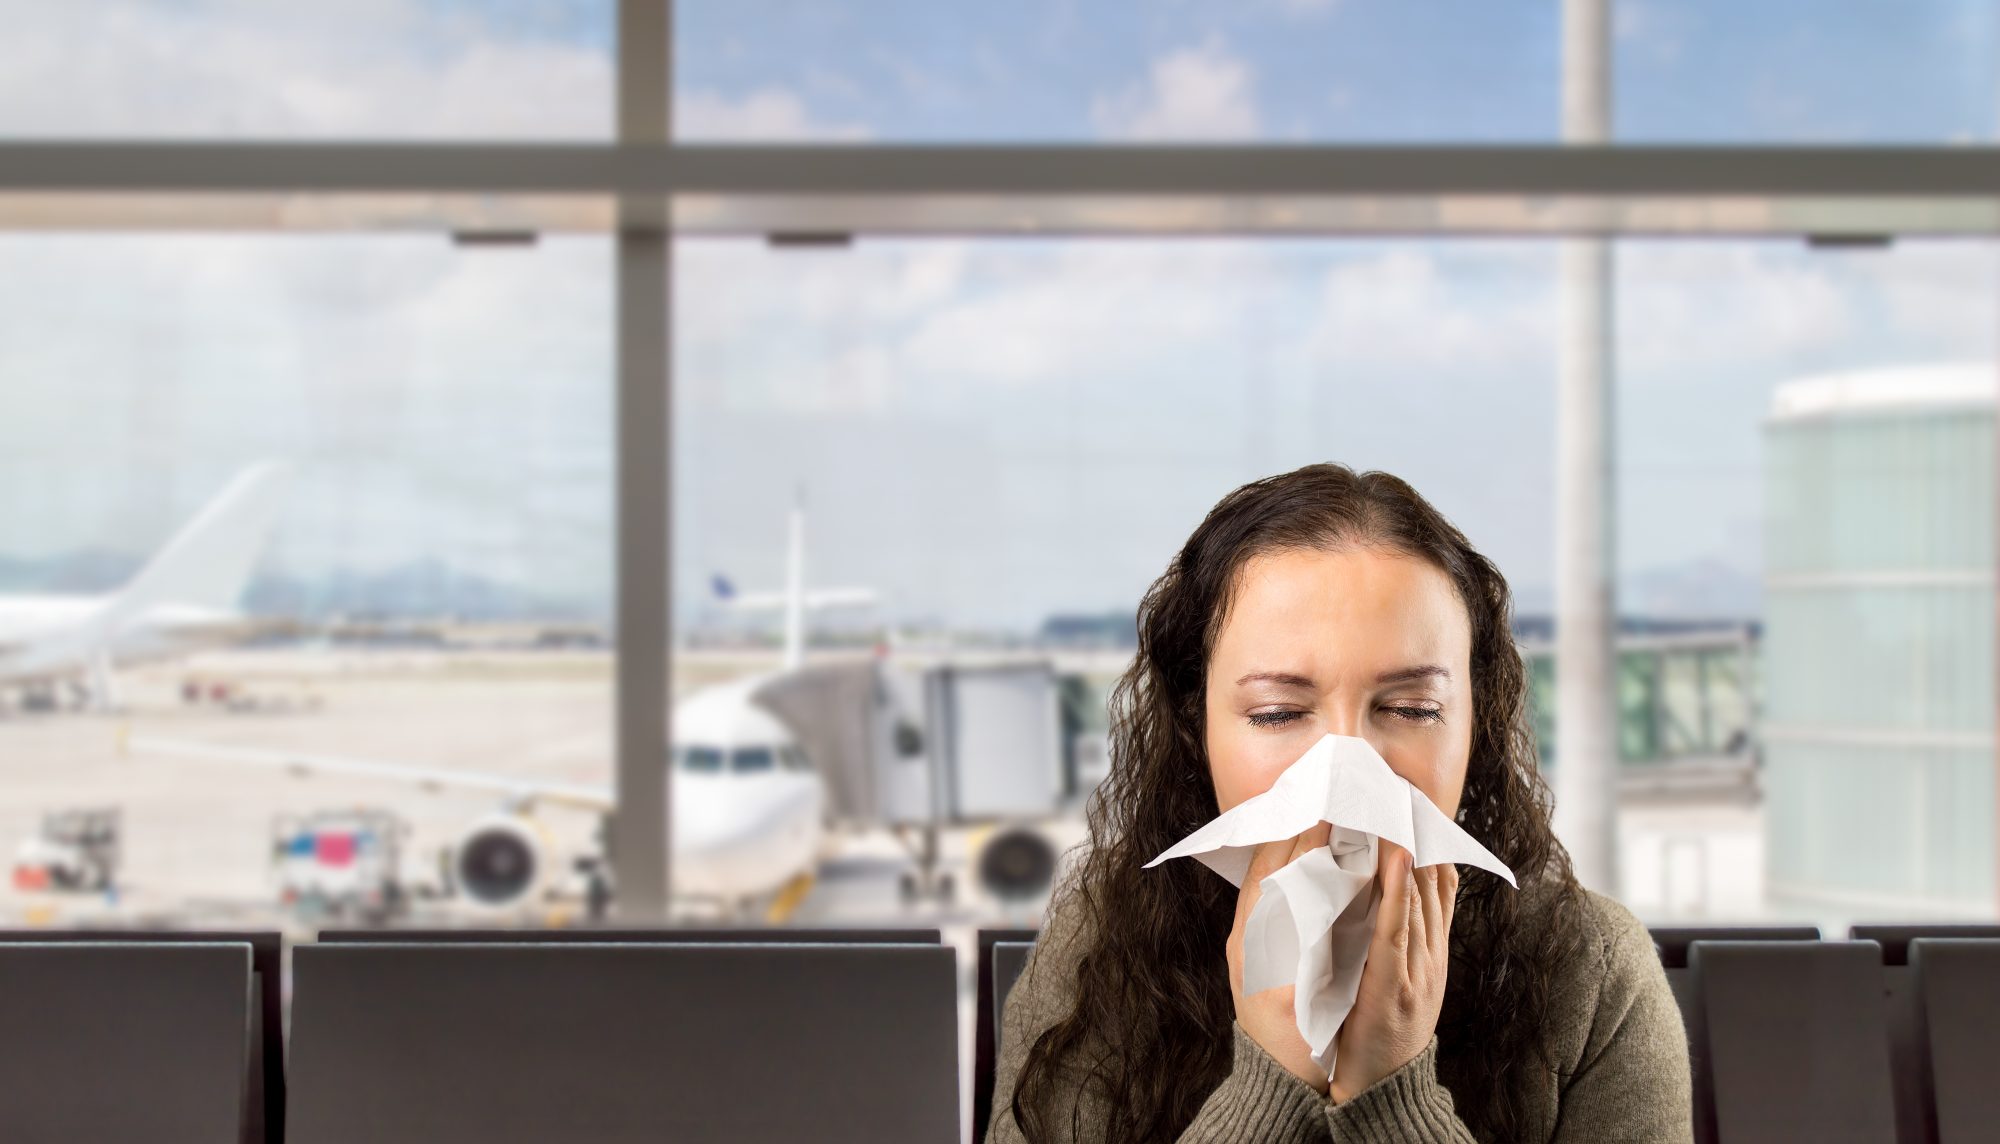 A Recent Study by MattressFirm Found That Over 75% of the 2,800 People Surveyed Said They Would Still Fly on a Plane, Even if They Had a Cold or Flu